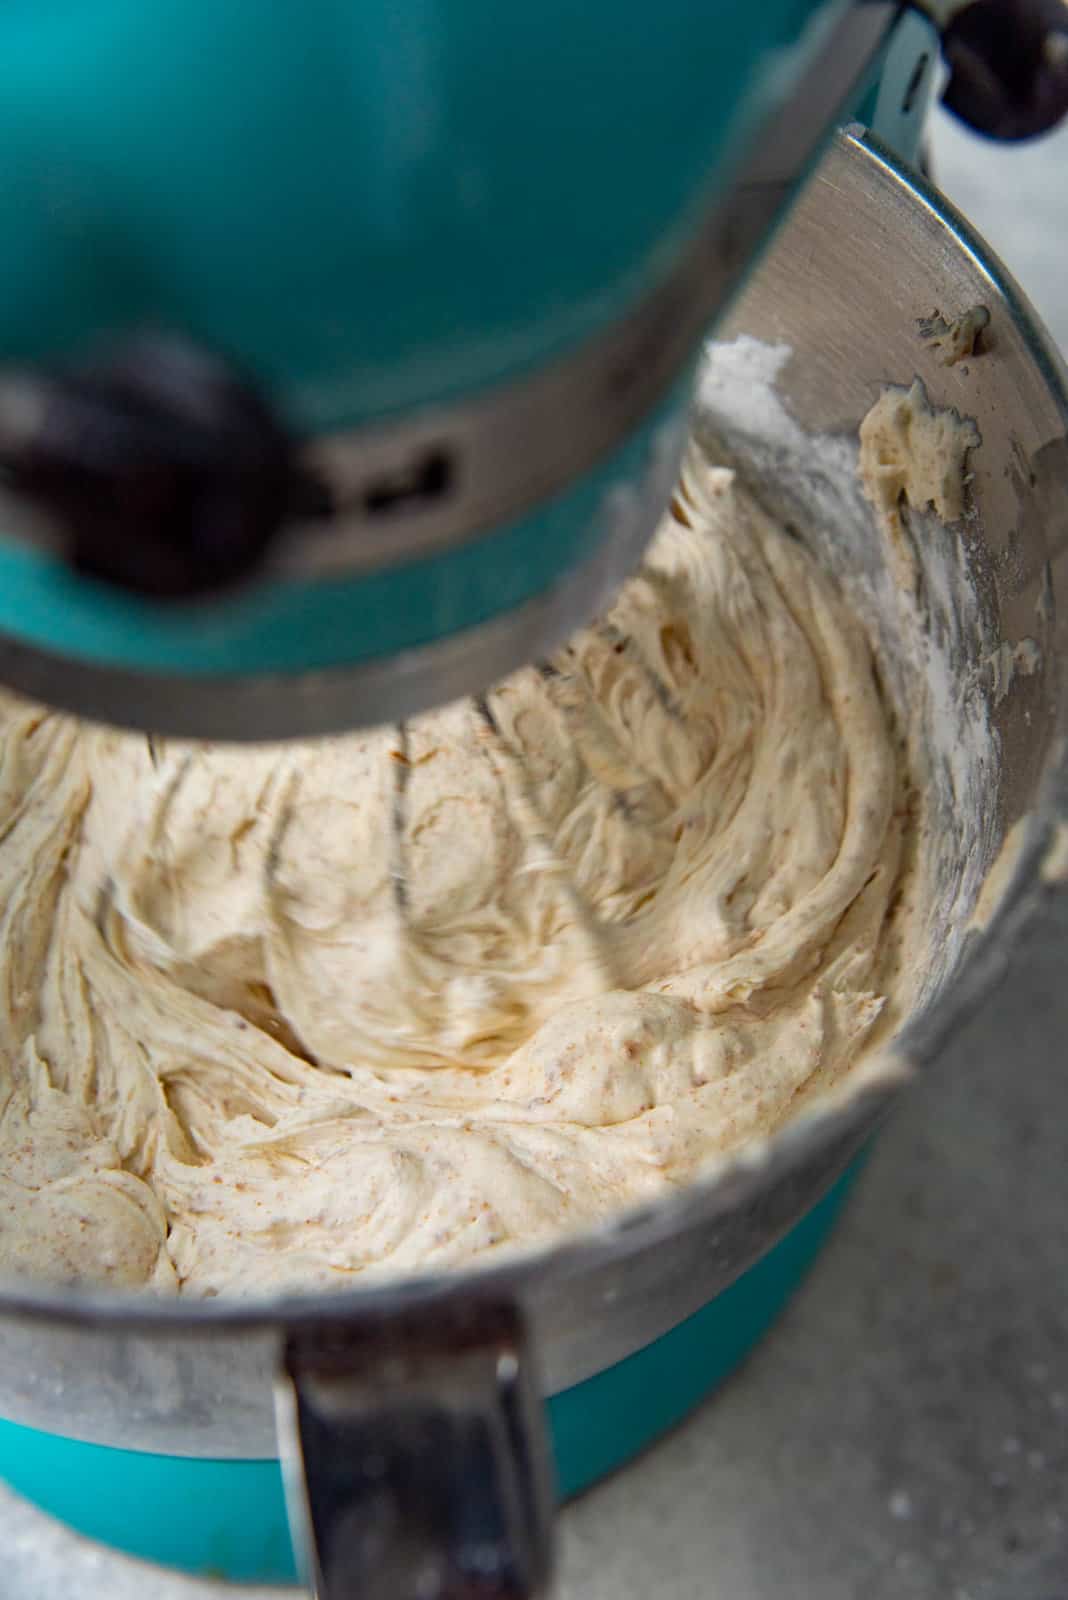 The brown butter cream cheese frosting mixing in a mixing bowl with a whisk attachment.